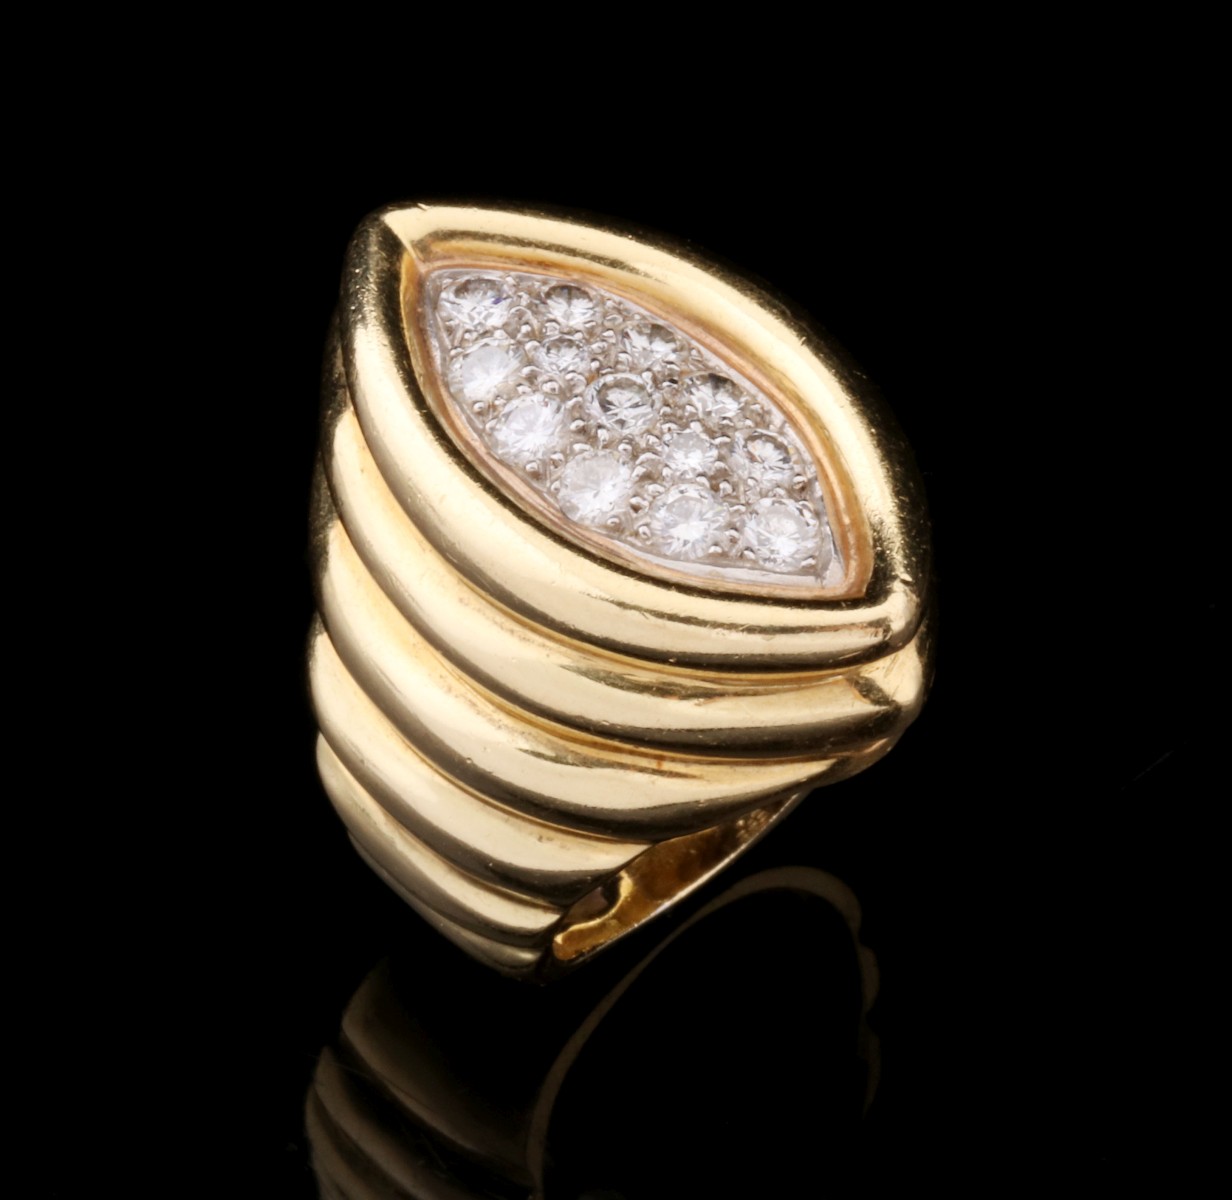 AN 18K GOLD AND DIAMOND FASHION RING, APPROX 1.1 CARATS